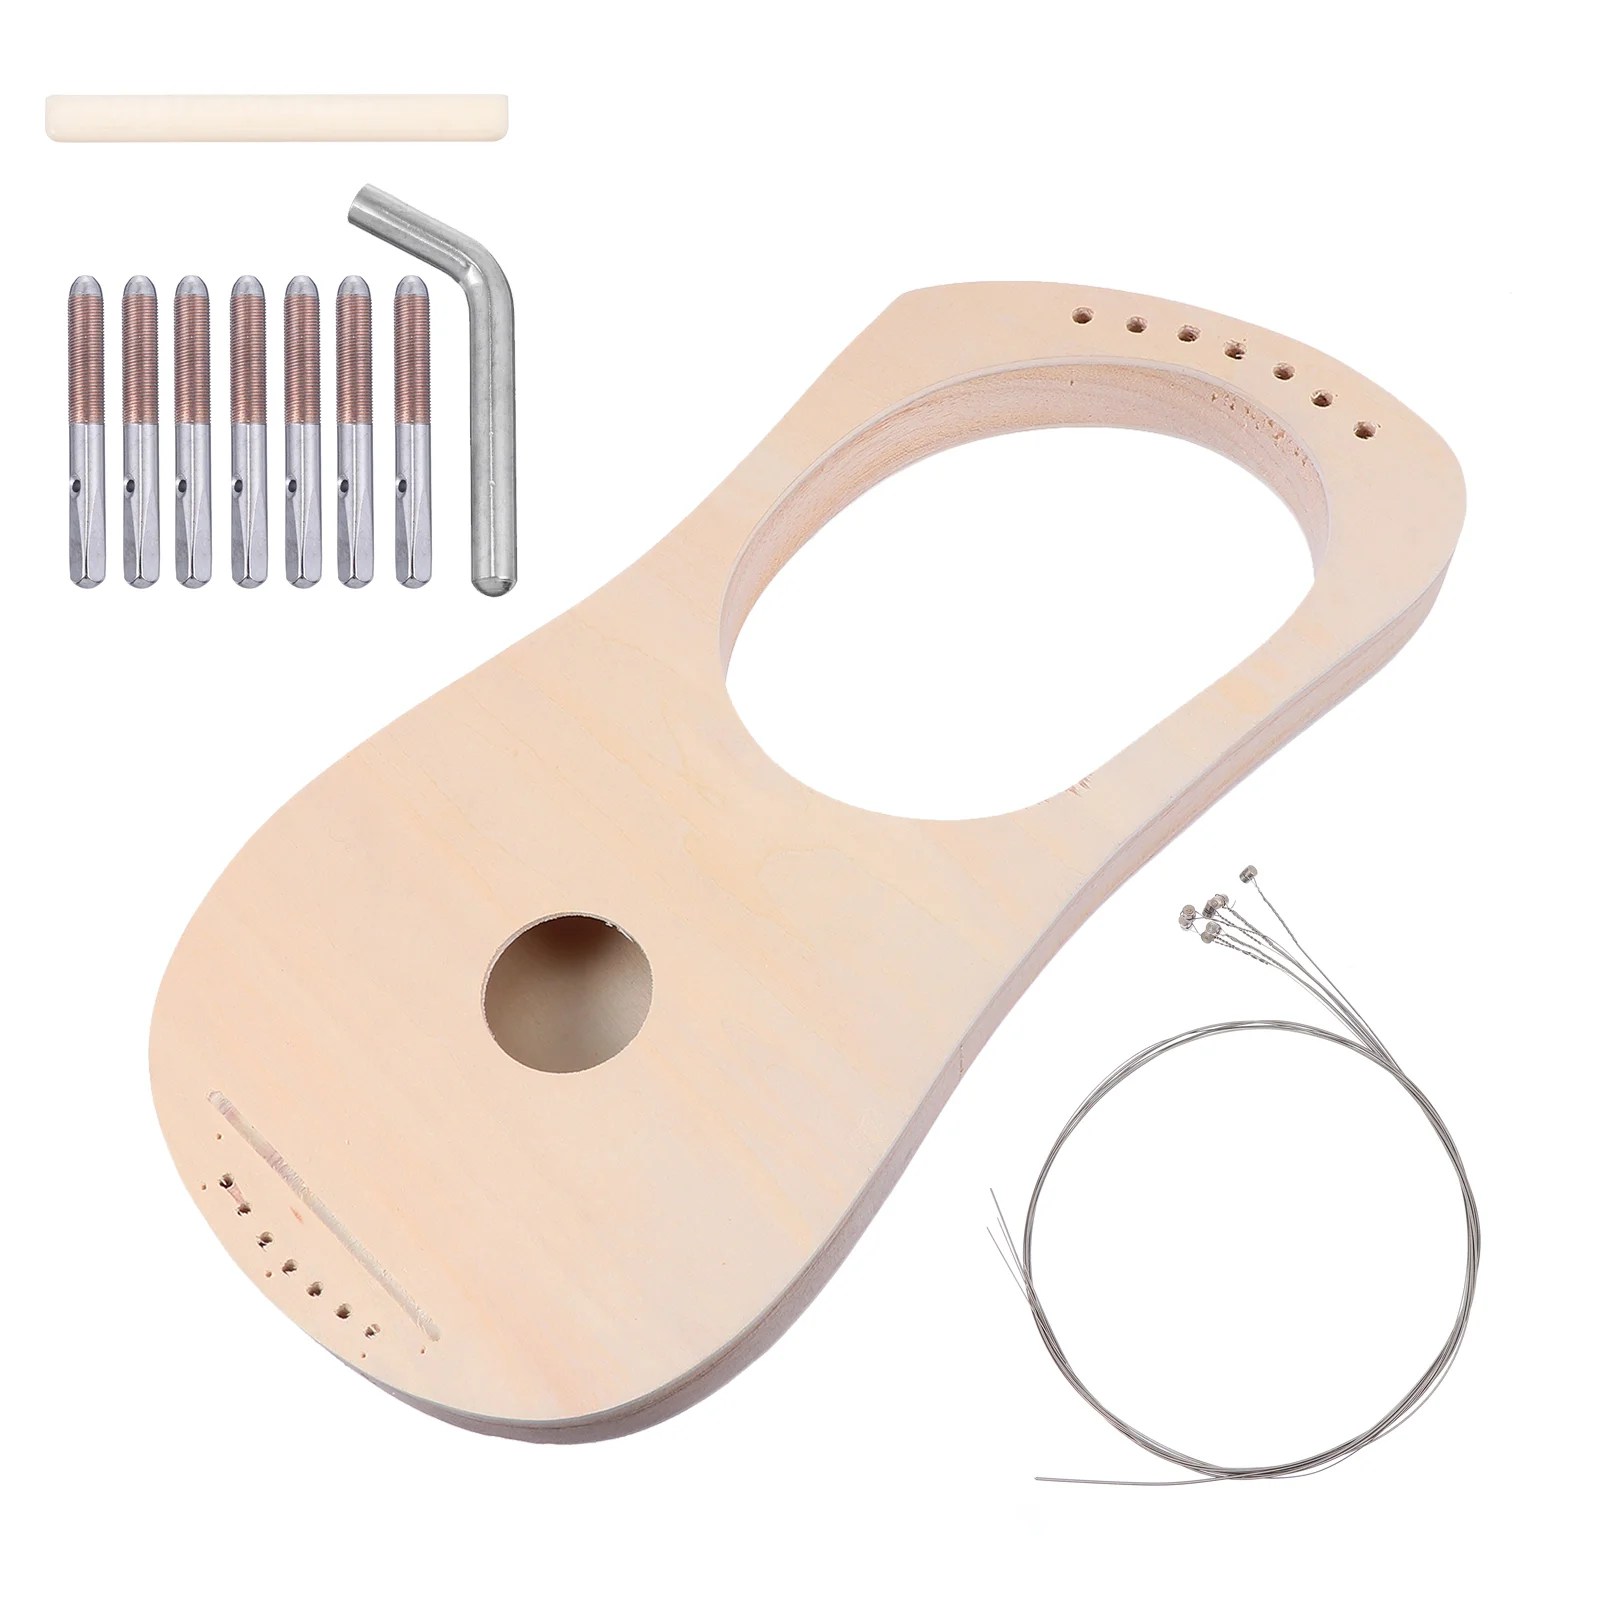 

Orchestral Musical Instrument Set Lyre Harp String Diy Kit Pin Nails Tuning Wrench Use Small Harp Musical Stringed